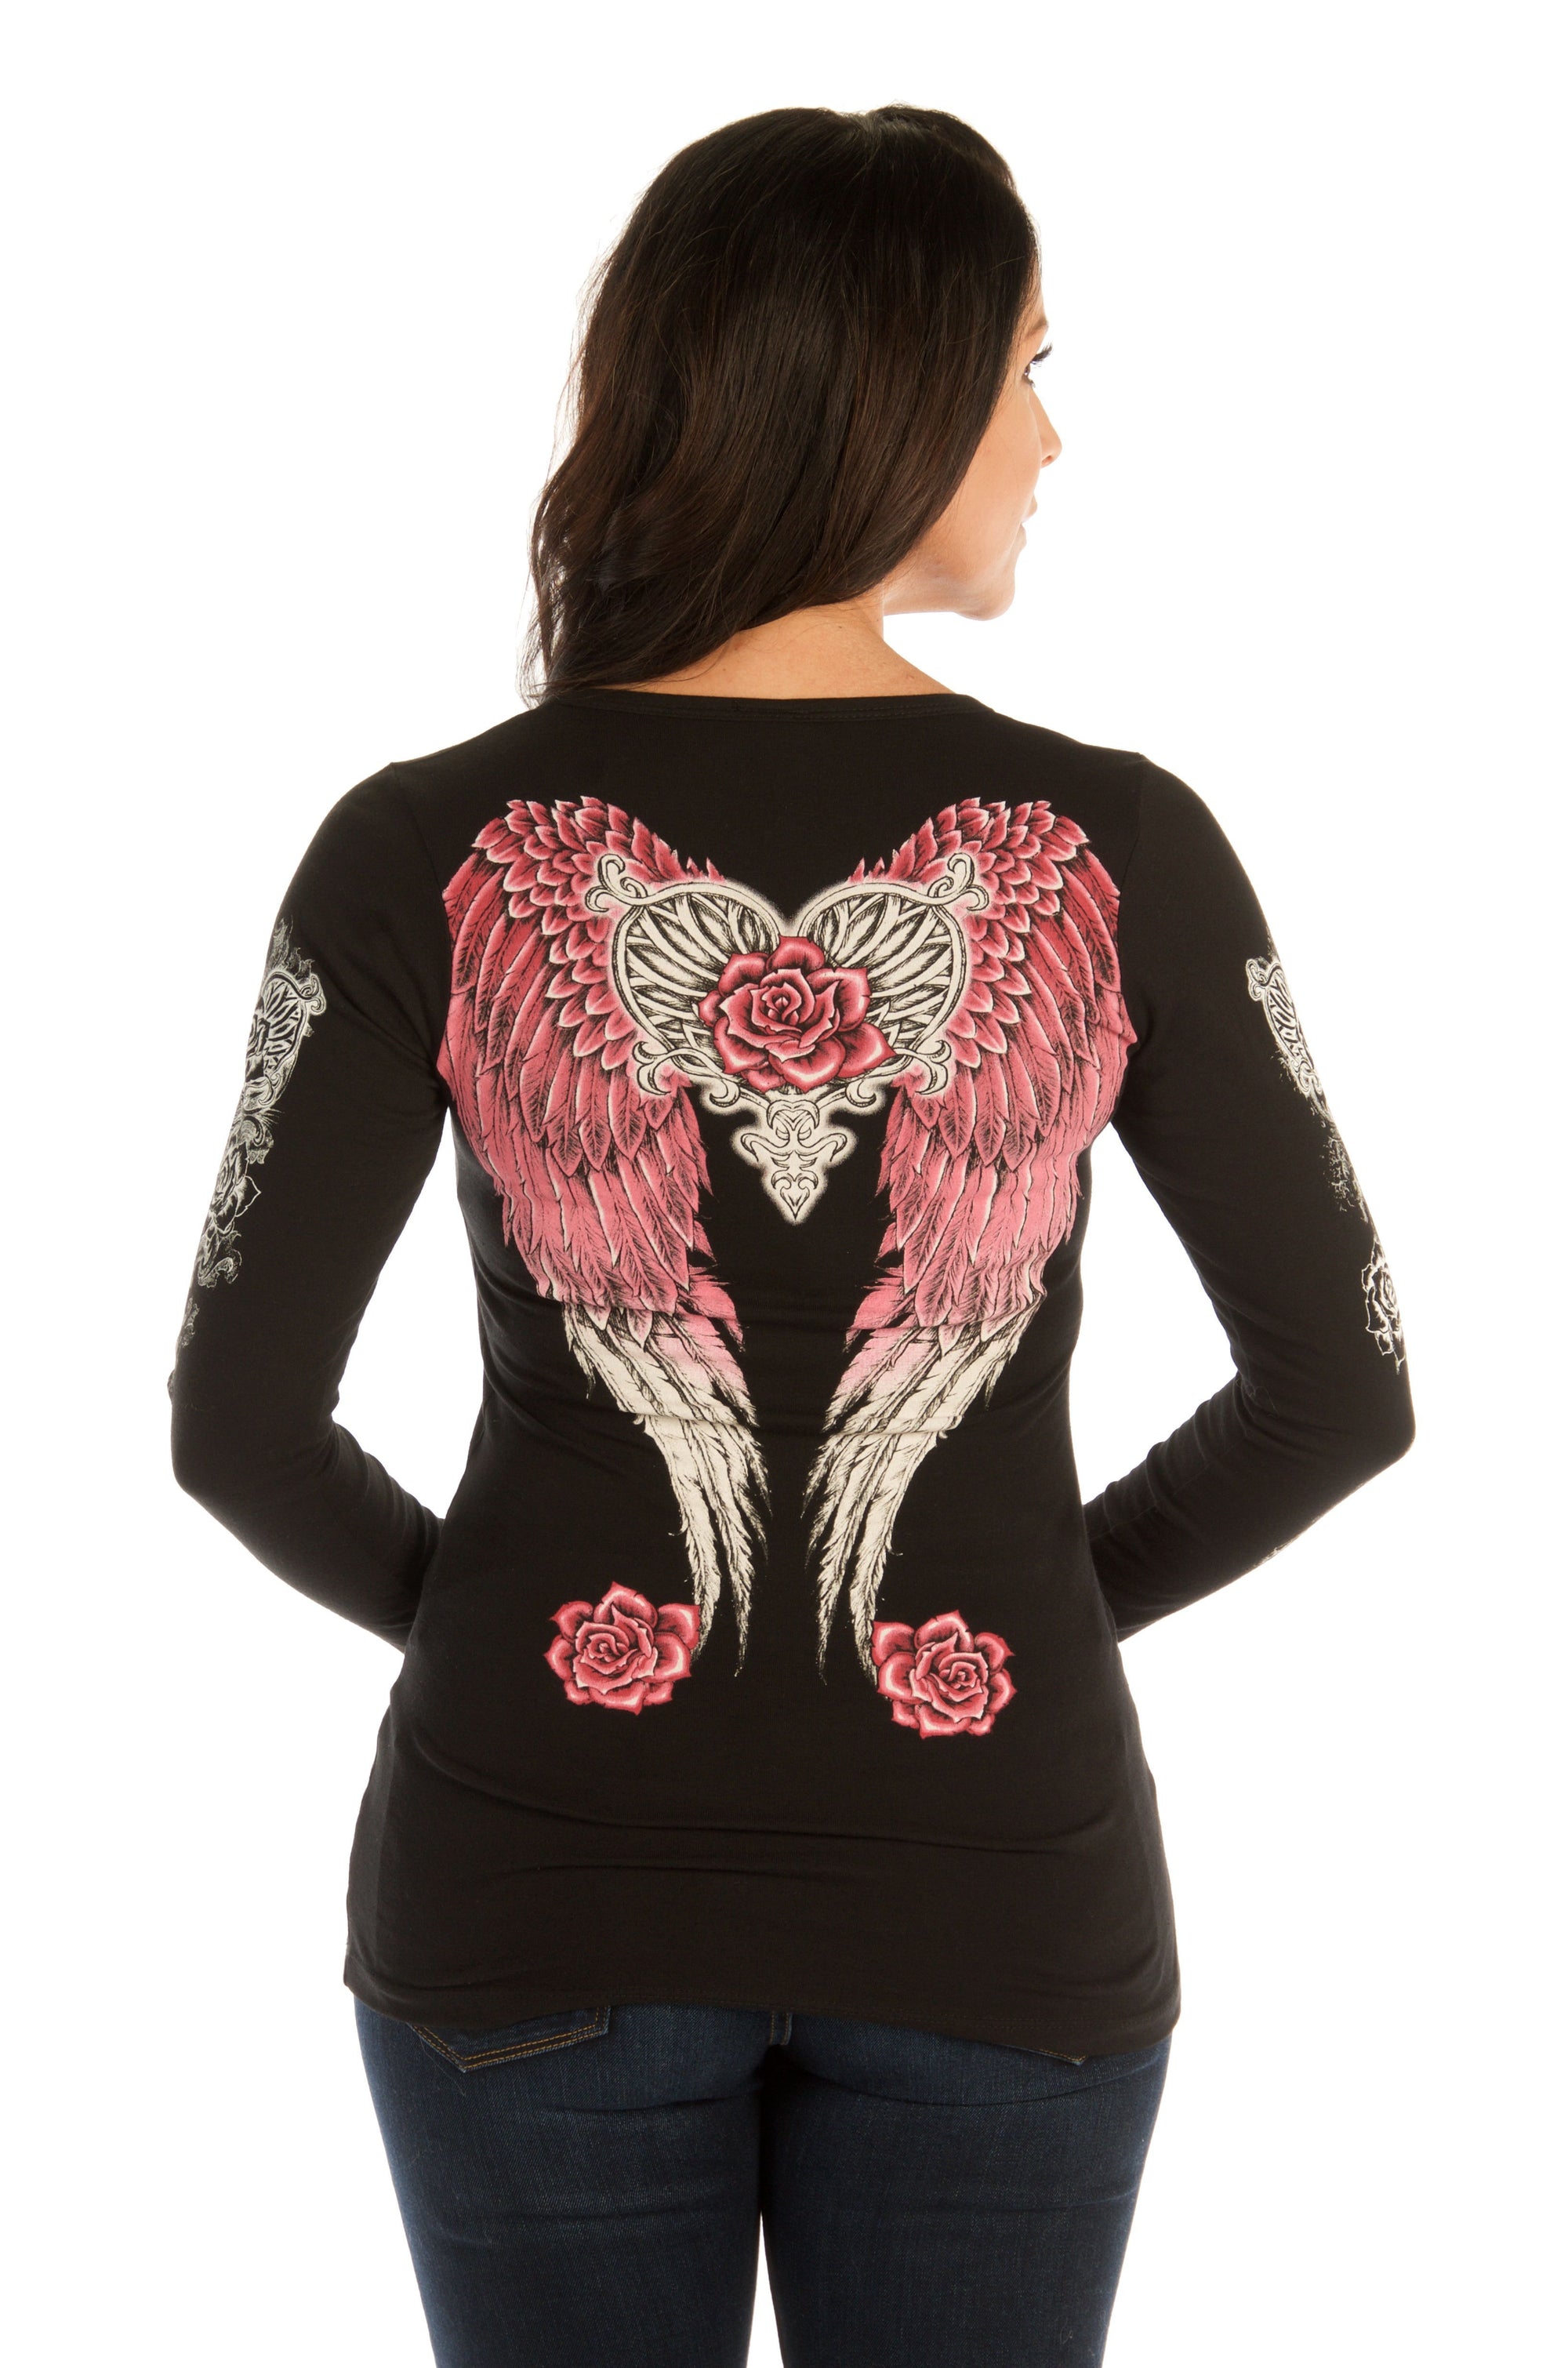 Liberty Wear Collection Tops: Hearts, Roses & Wings